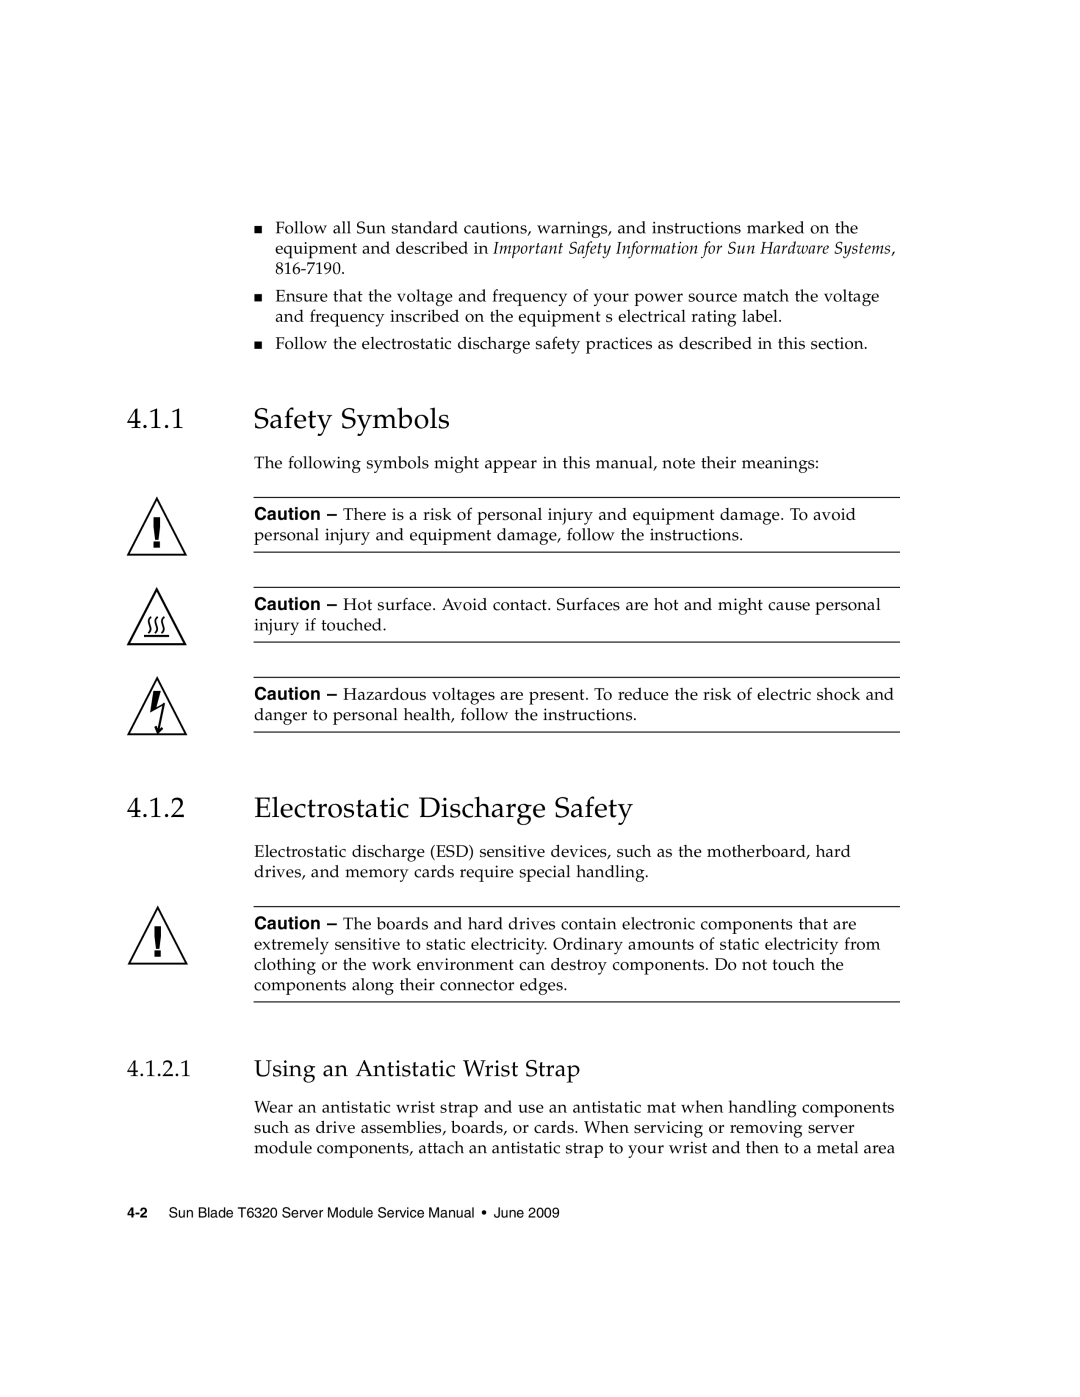 Sun Microsystems T6320 service manual Safety Symbols, Electrostatic Discharge Safety, Using an Antistatic Wrist Strap 